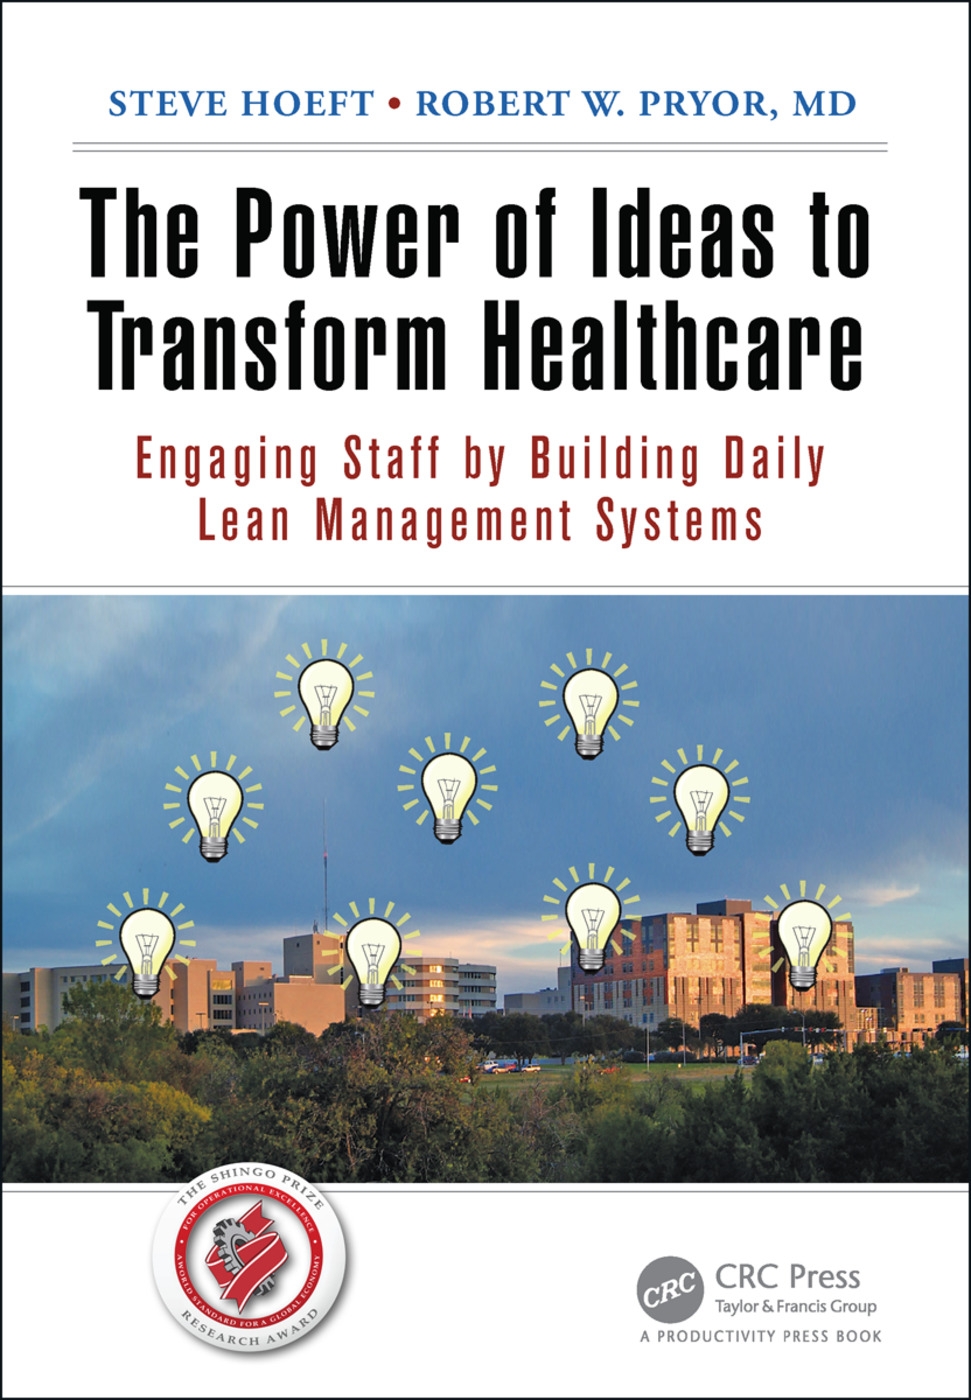 The Power of Ideas to Transform Healthcare: Engaging Staff by Building Daily Lean Management Systems